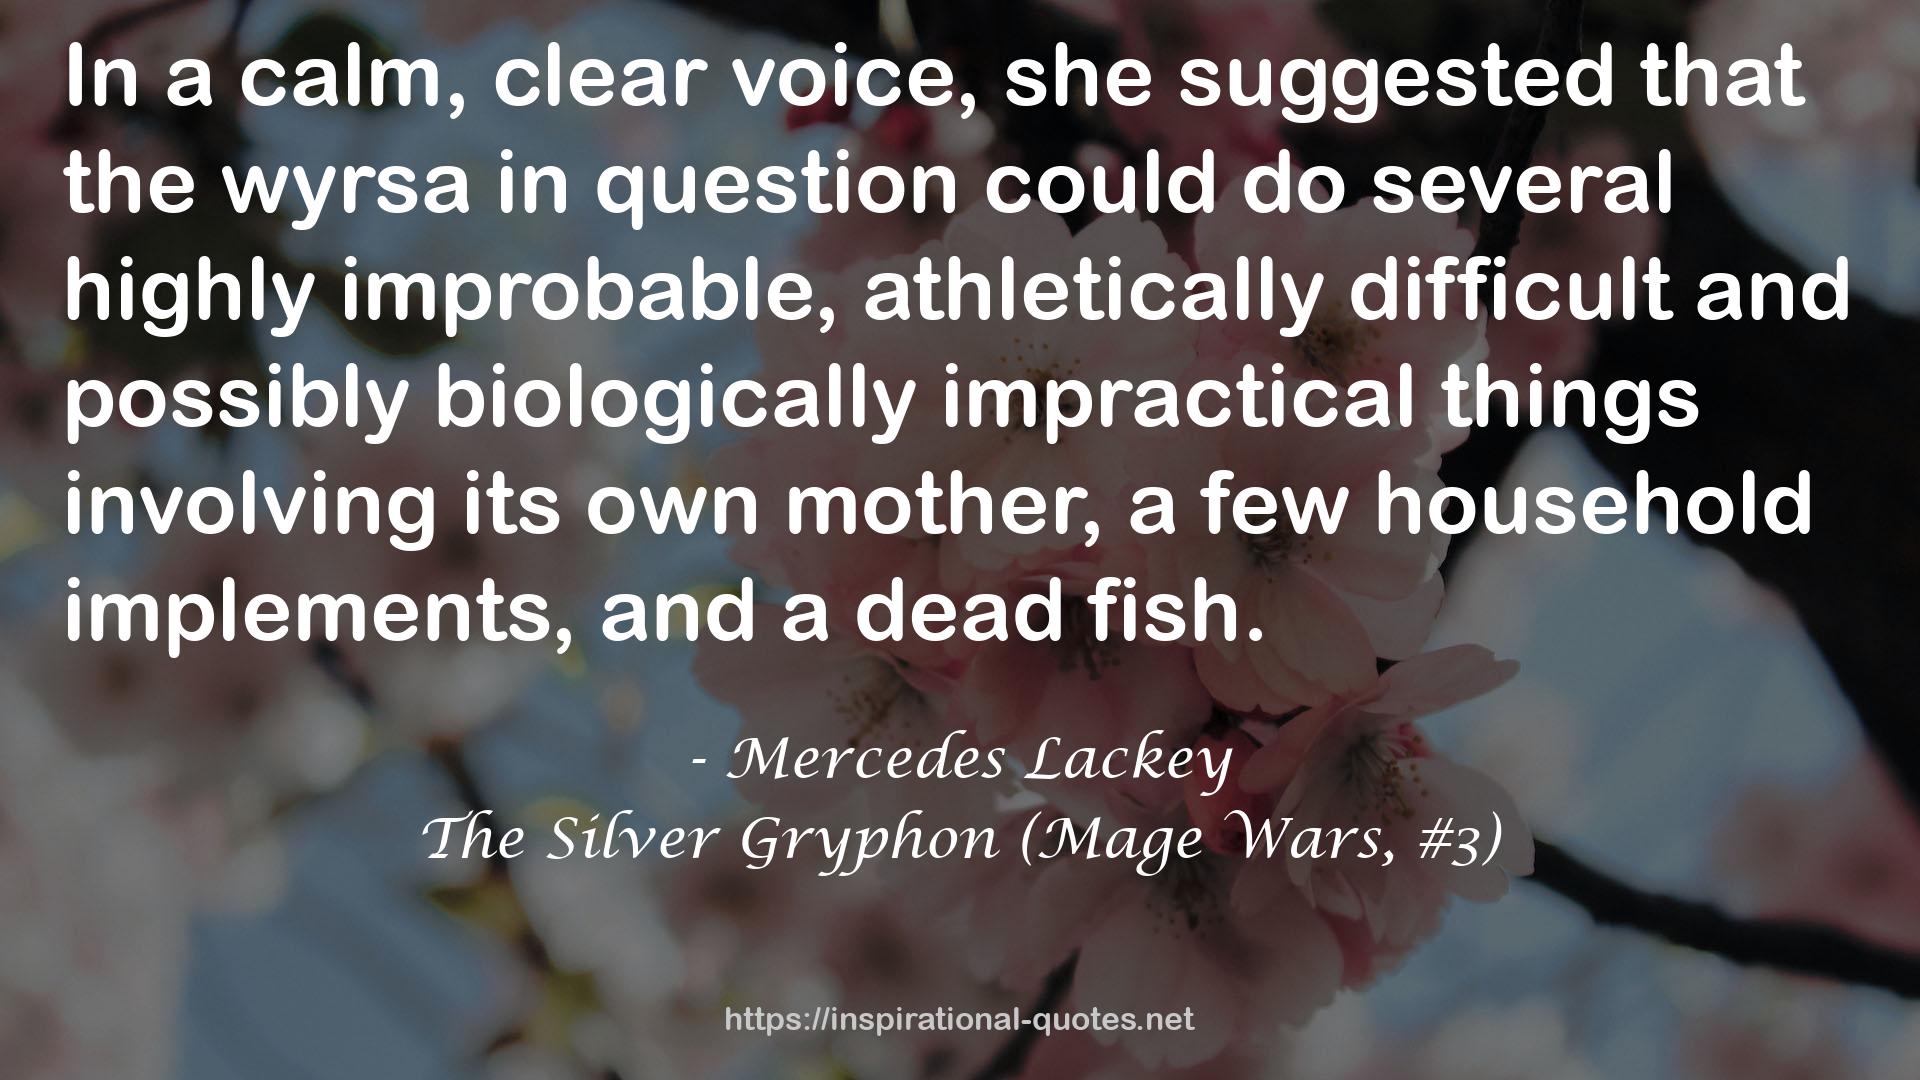 The Silver Gryphon (Mage Wars, #3) QUOTES